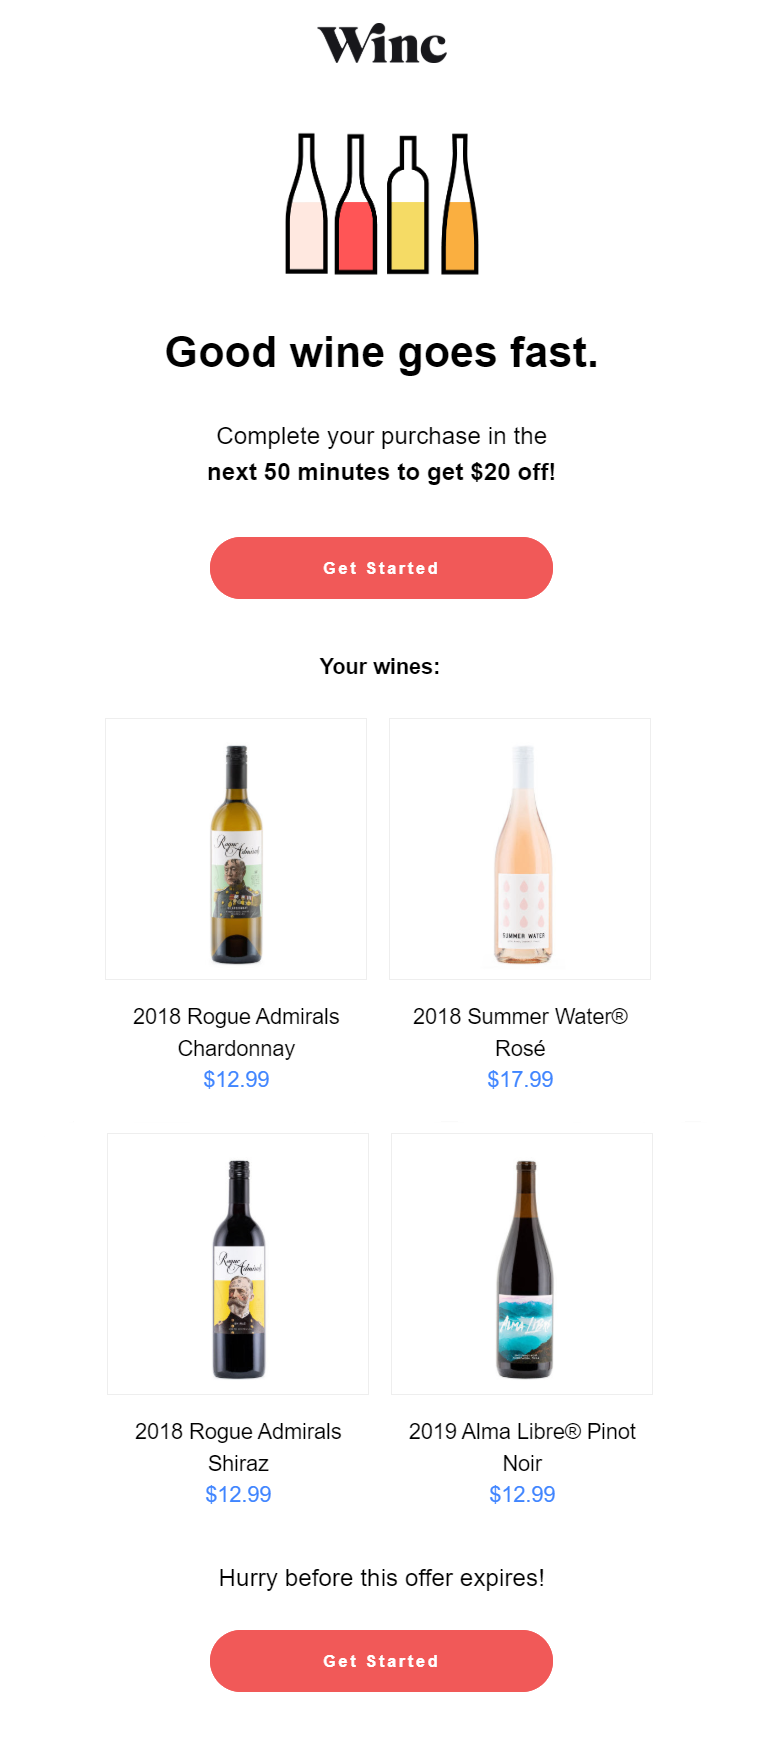 abandoned cart email from Winc